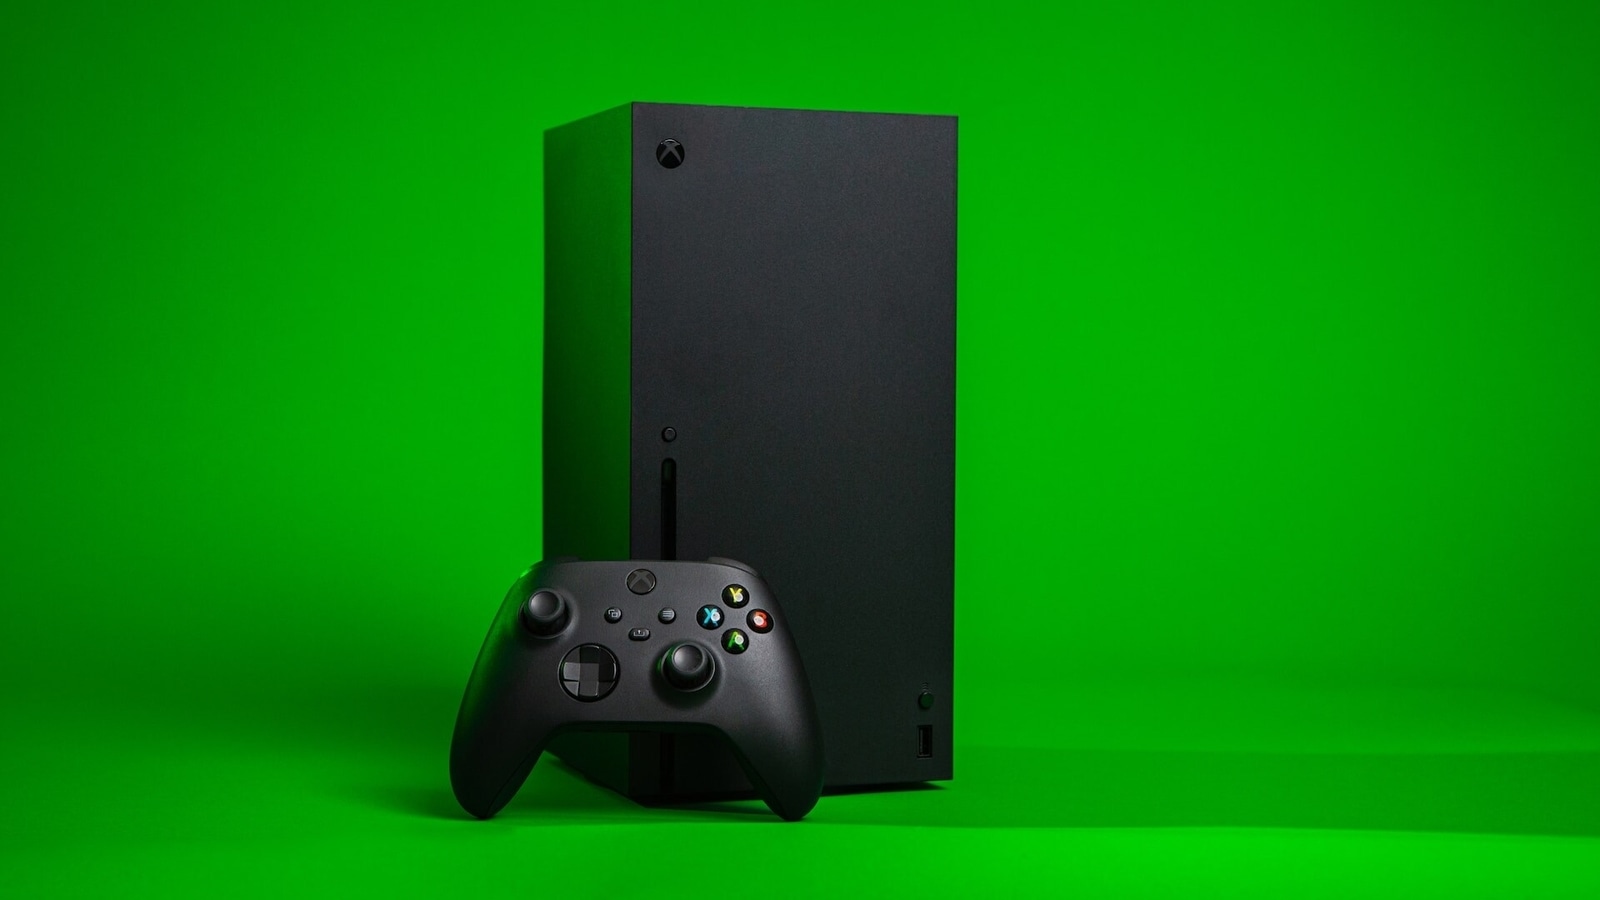 Bummer! Microsoft to raise the price of Xbox Series X, Game Pass